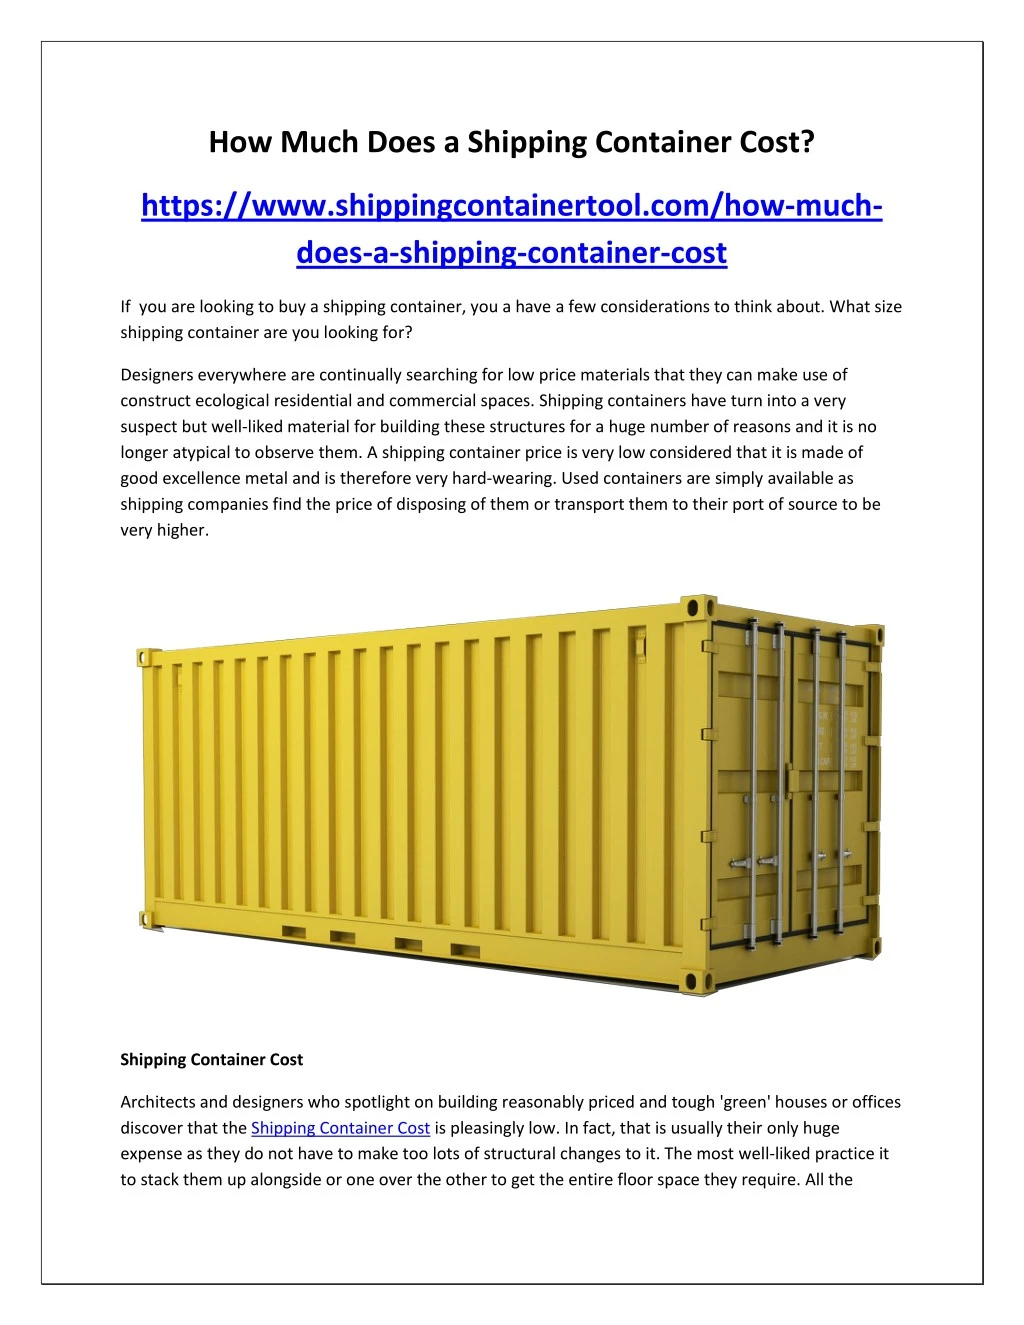 PPT - How Much Does a Shipping Container Cost? PowerPoint Presentation